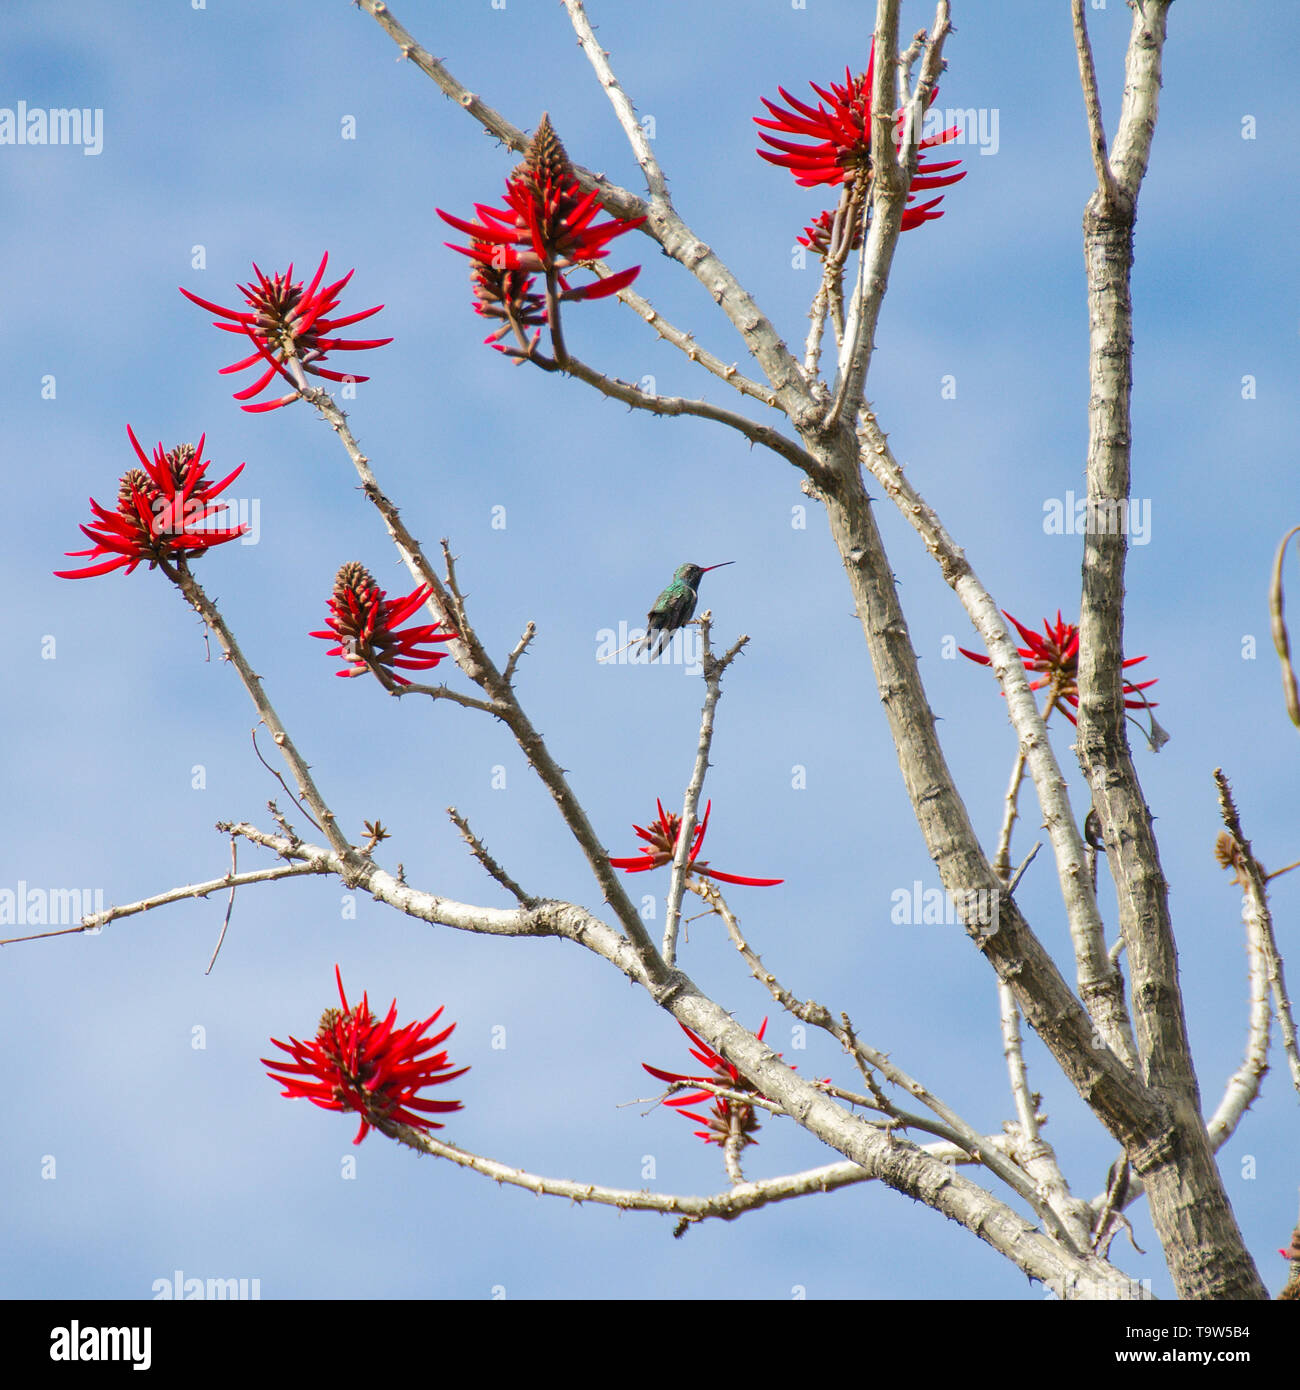 A hummingbird on an erythrina tree with red flowers at Cuicuilco Archaeological Site, Mexico City, Mexico. Stock Photo